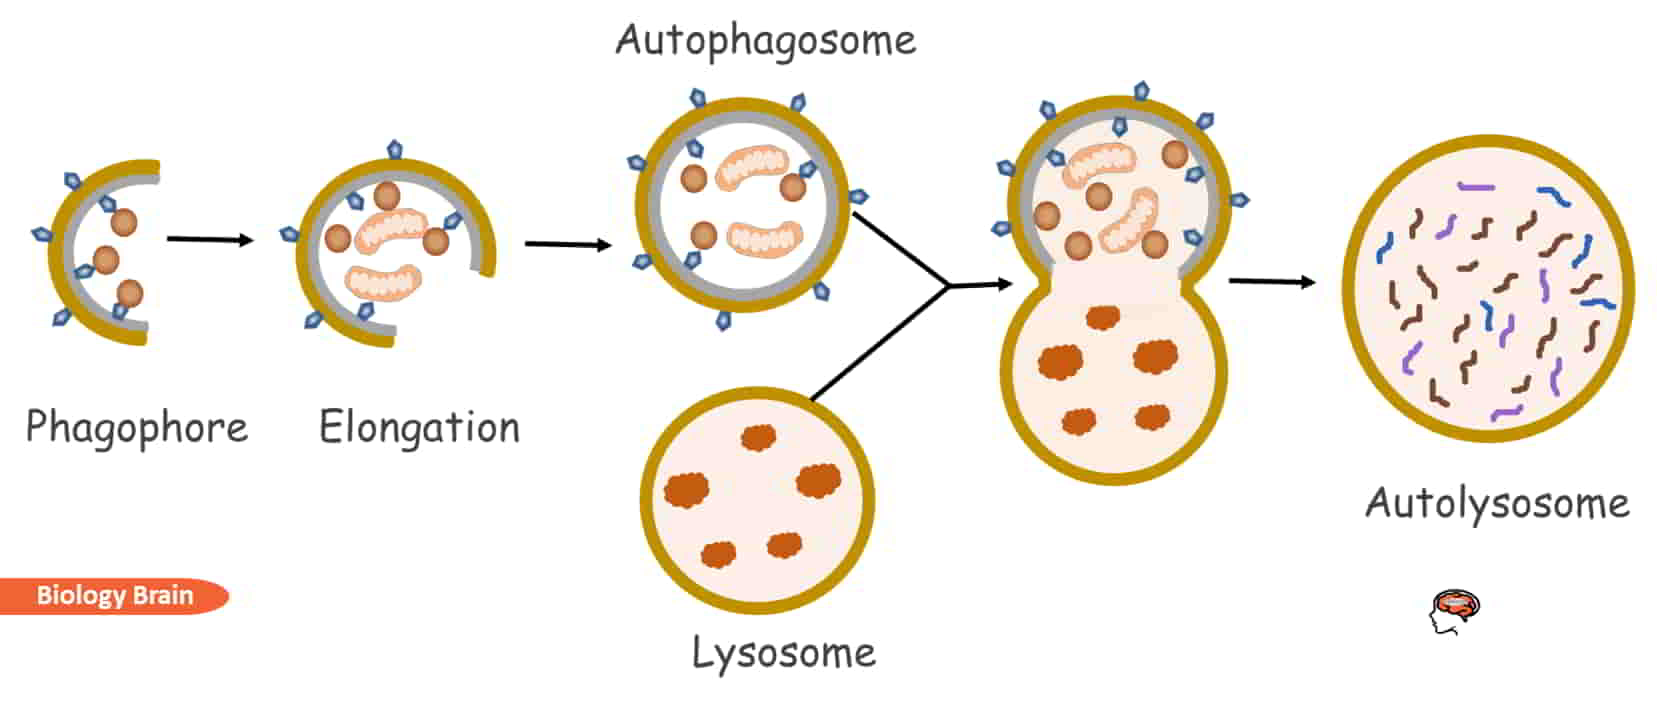 Degradation of intracellular components by lysosomes